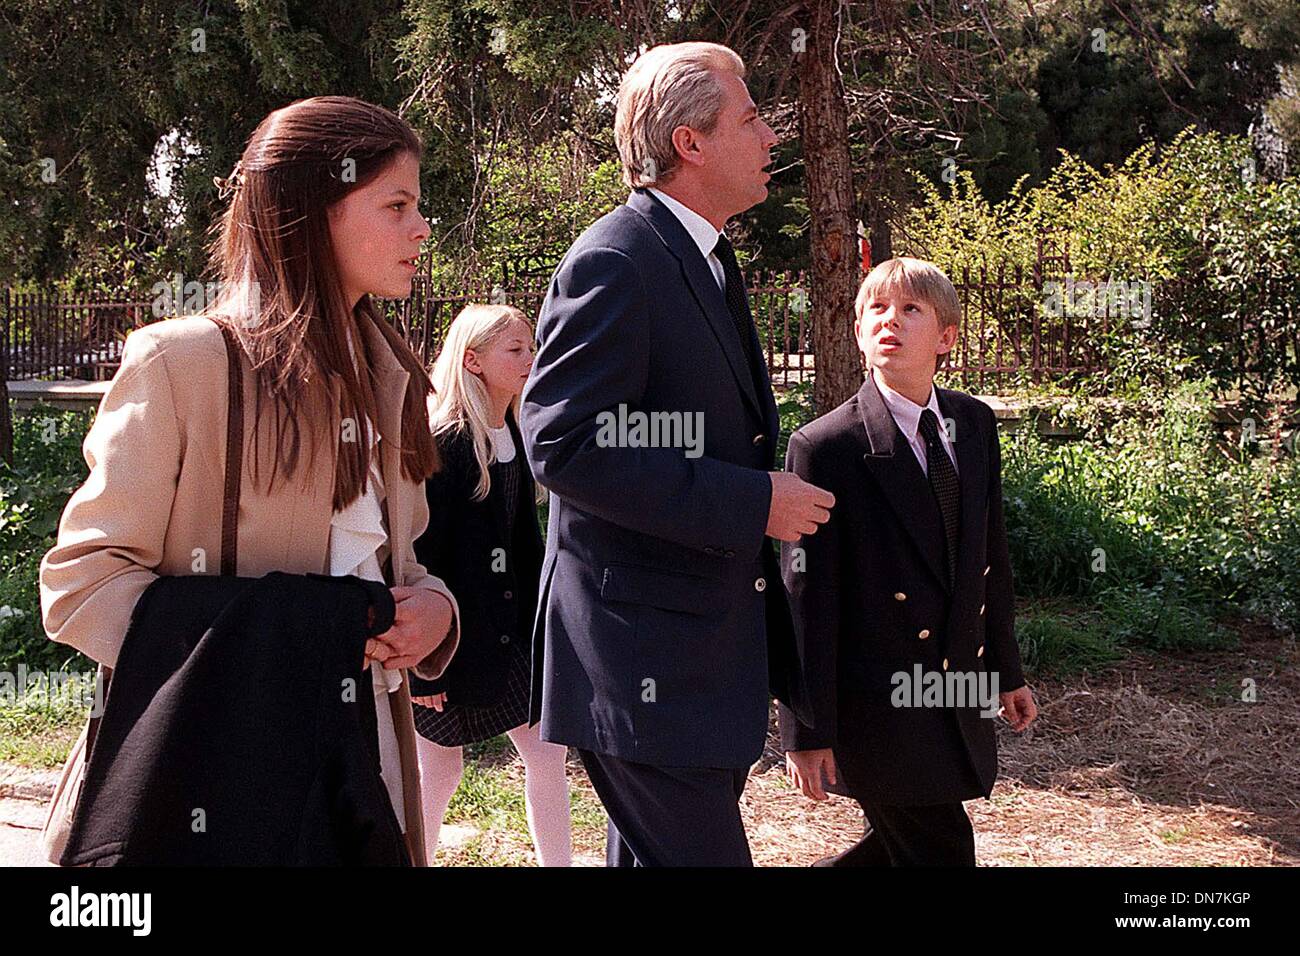 Dec. 30, 2002 - CREDIT: Globe Photos NAME/ /   I2062SX.ATHINA ONASSIS & HER FATHER THIERRY ROUSSEL WITH FAMILY TOUR ATHENS GREECE SURROUNDED BY BODYGUARDS, AT THE ACROPOLIS  GREECE..3/22/98.. SPHINX/  /    1998.ATHINA ONASSIS & HER FATHER THIERRY ROUSSEL WITH FAMILY(Credit Image: © Globe Photos/ZUMAPRESS.com) Stock Photo